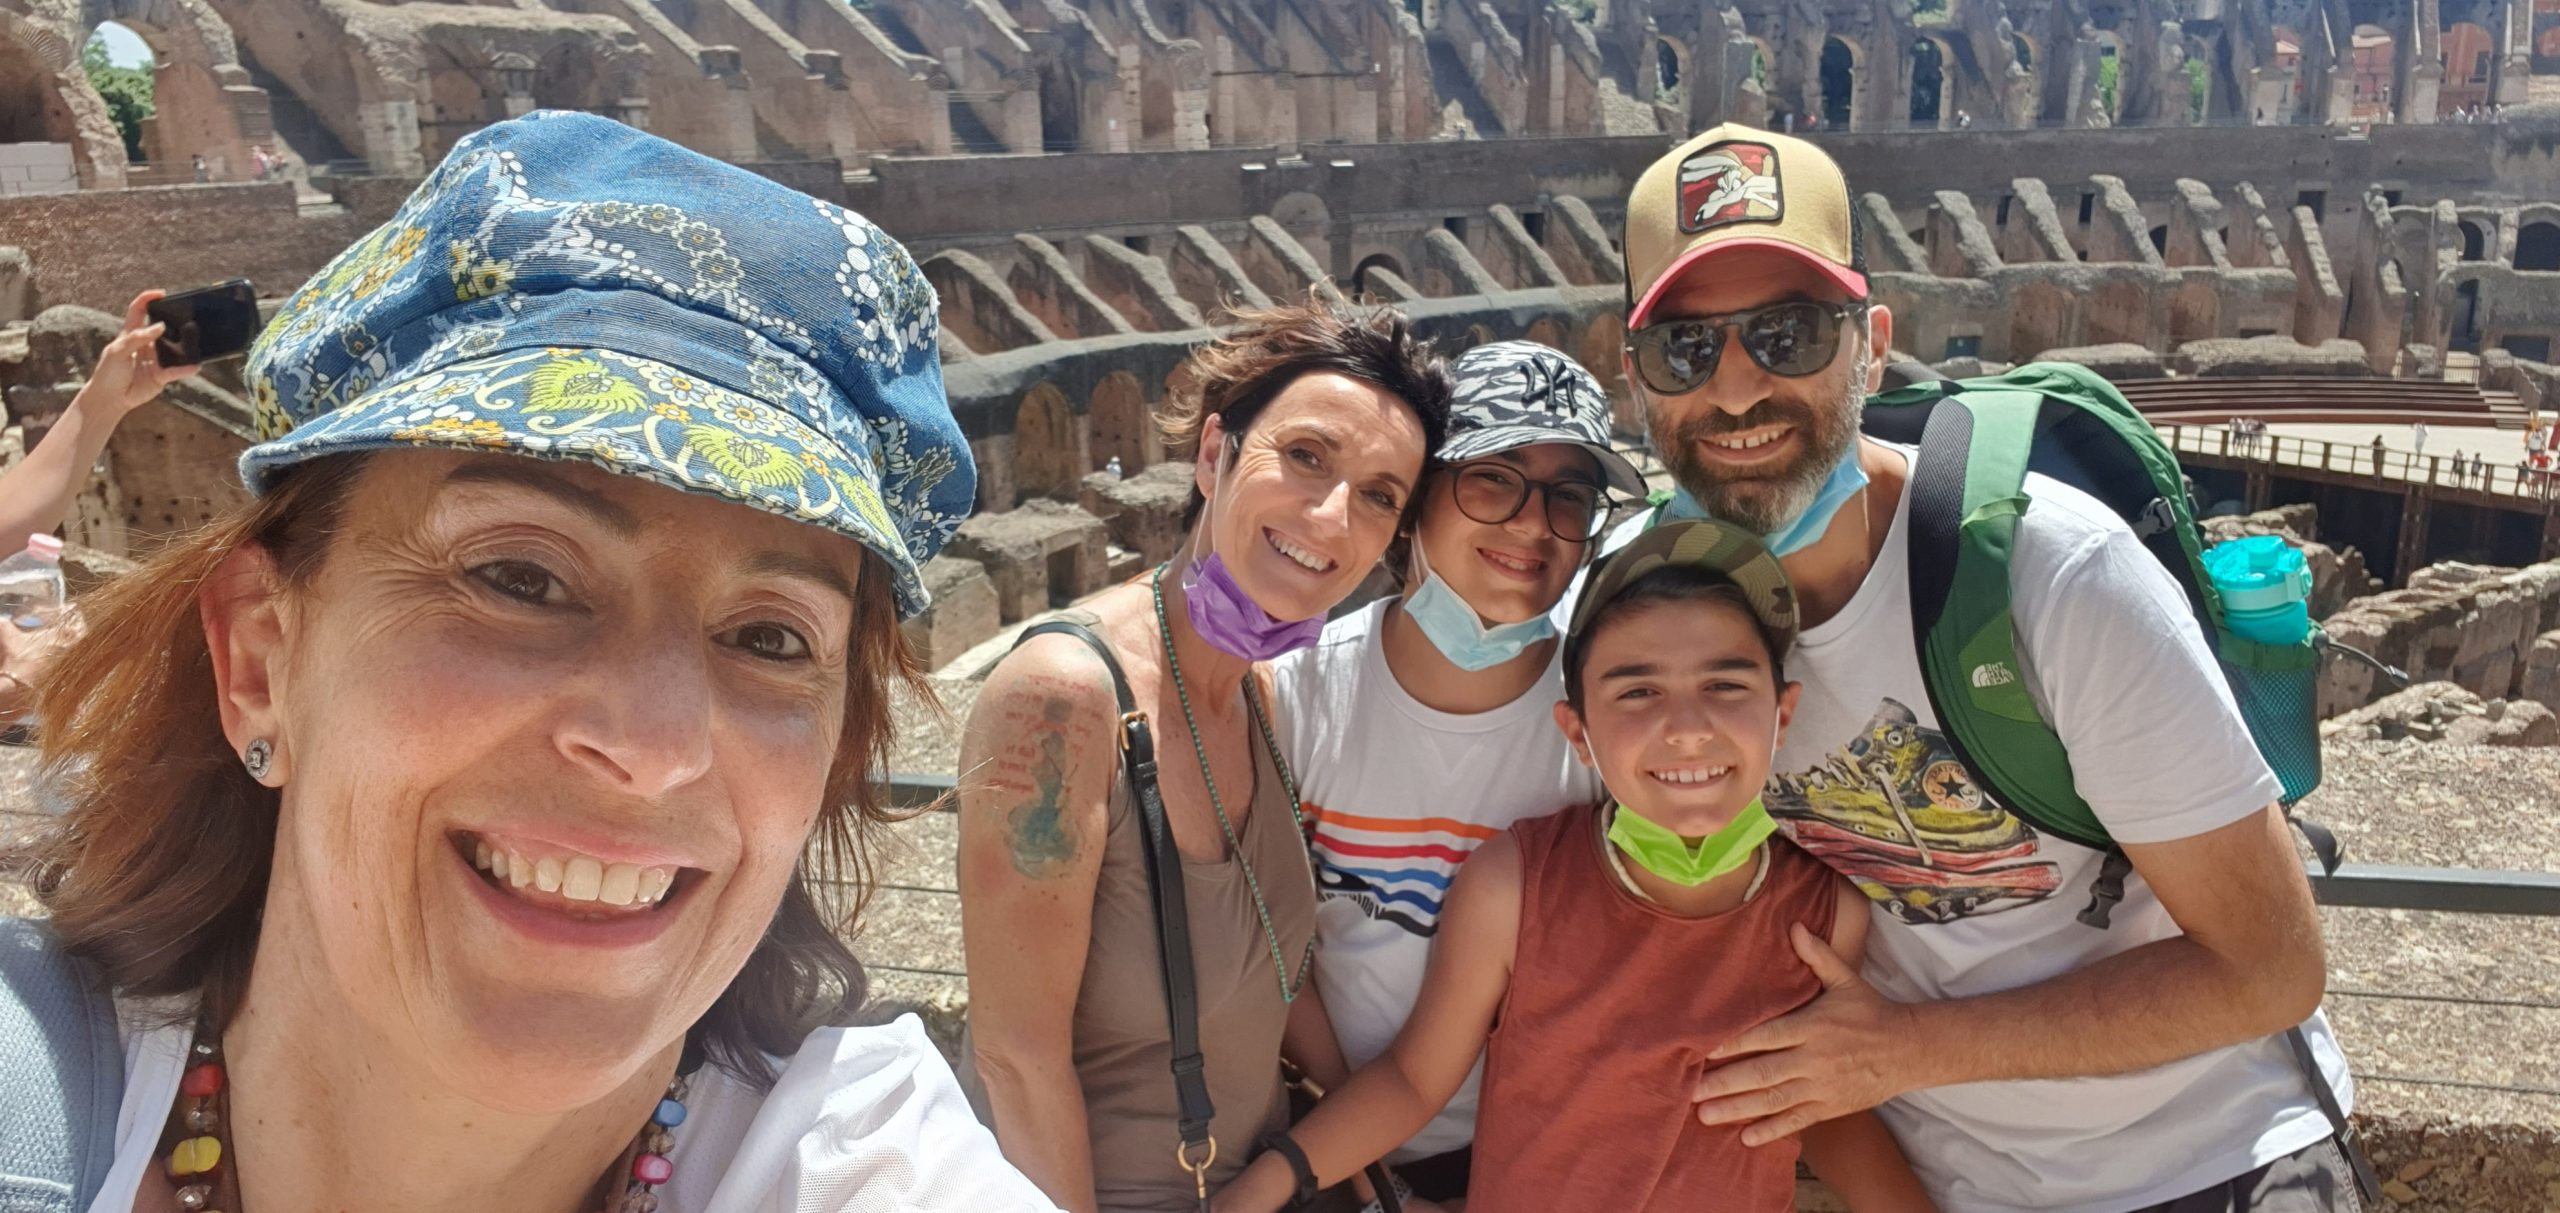 Family in the Colosseum